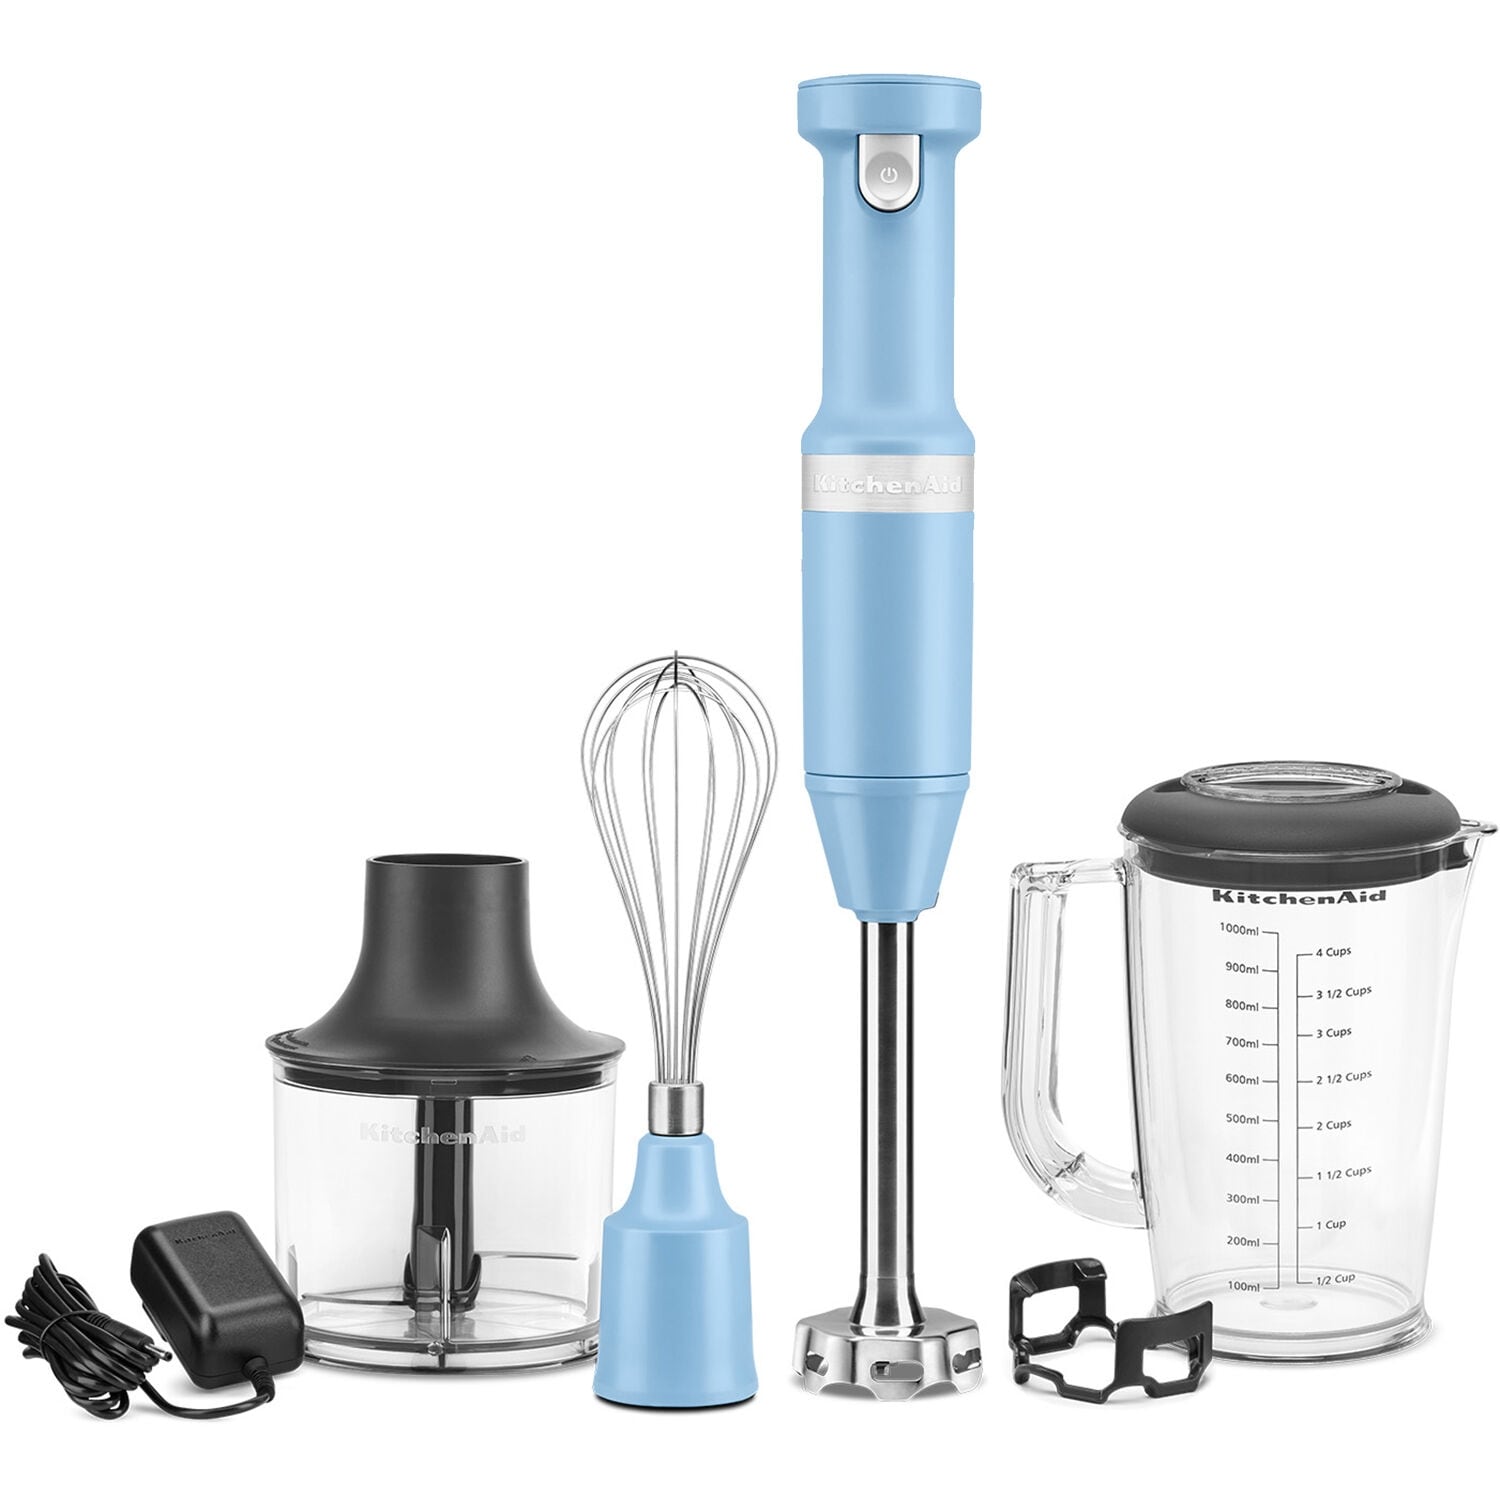 https://ak1.ostkcdn.com/images/products/is/images/direct/0d2f6905f2f602daa37873dae435ab393ec8ea59/KitchenAid-Cordless-Variable-Speed-Hand-Blender-with-Chopper-and-Whisk-Attachment-in-Blue-Velvet.jpg